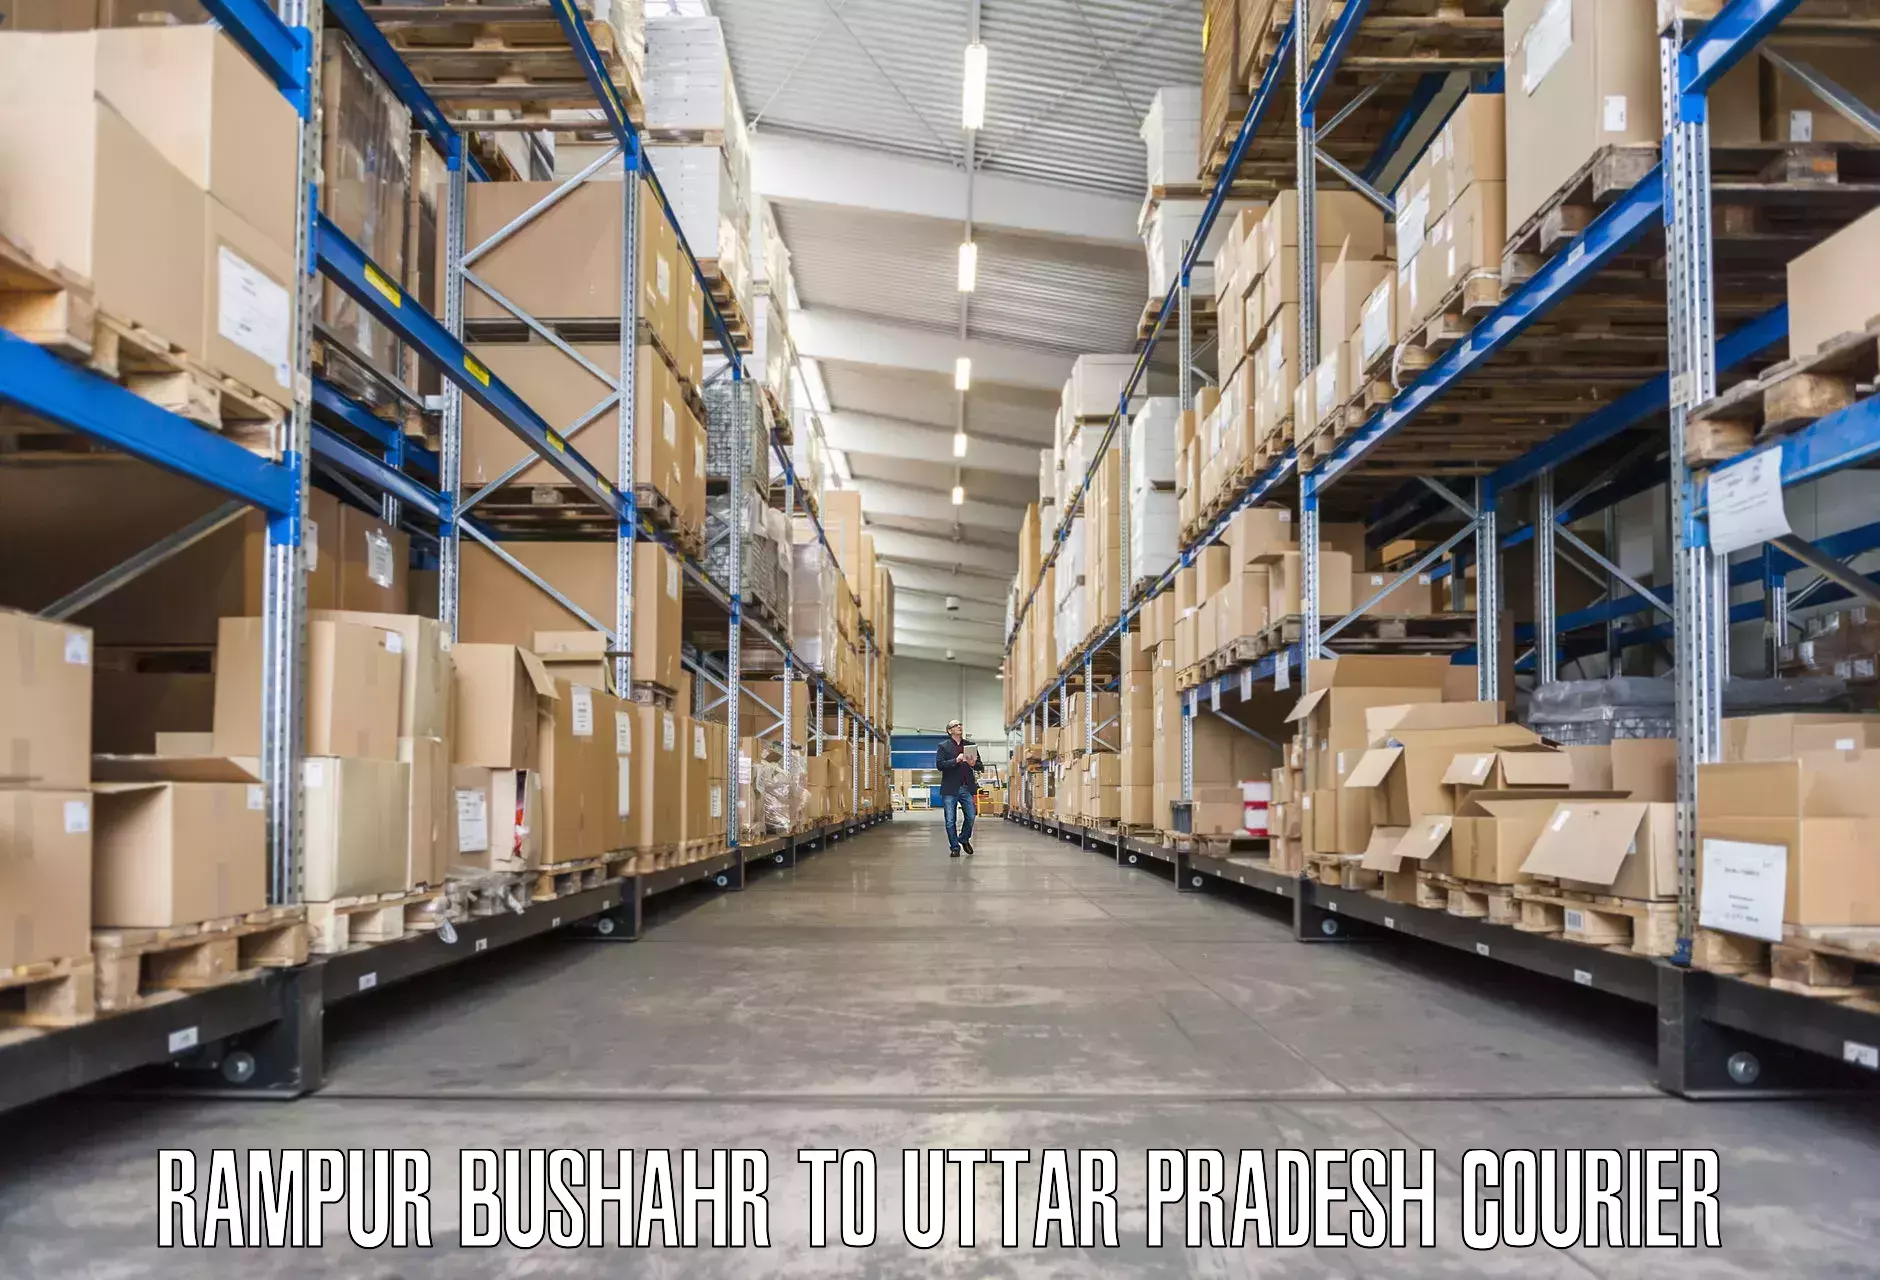 Furniture moving experts Rampur Bushahr to Firozabad